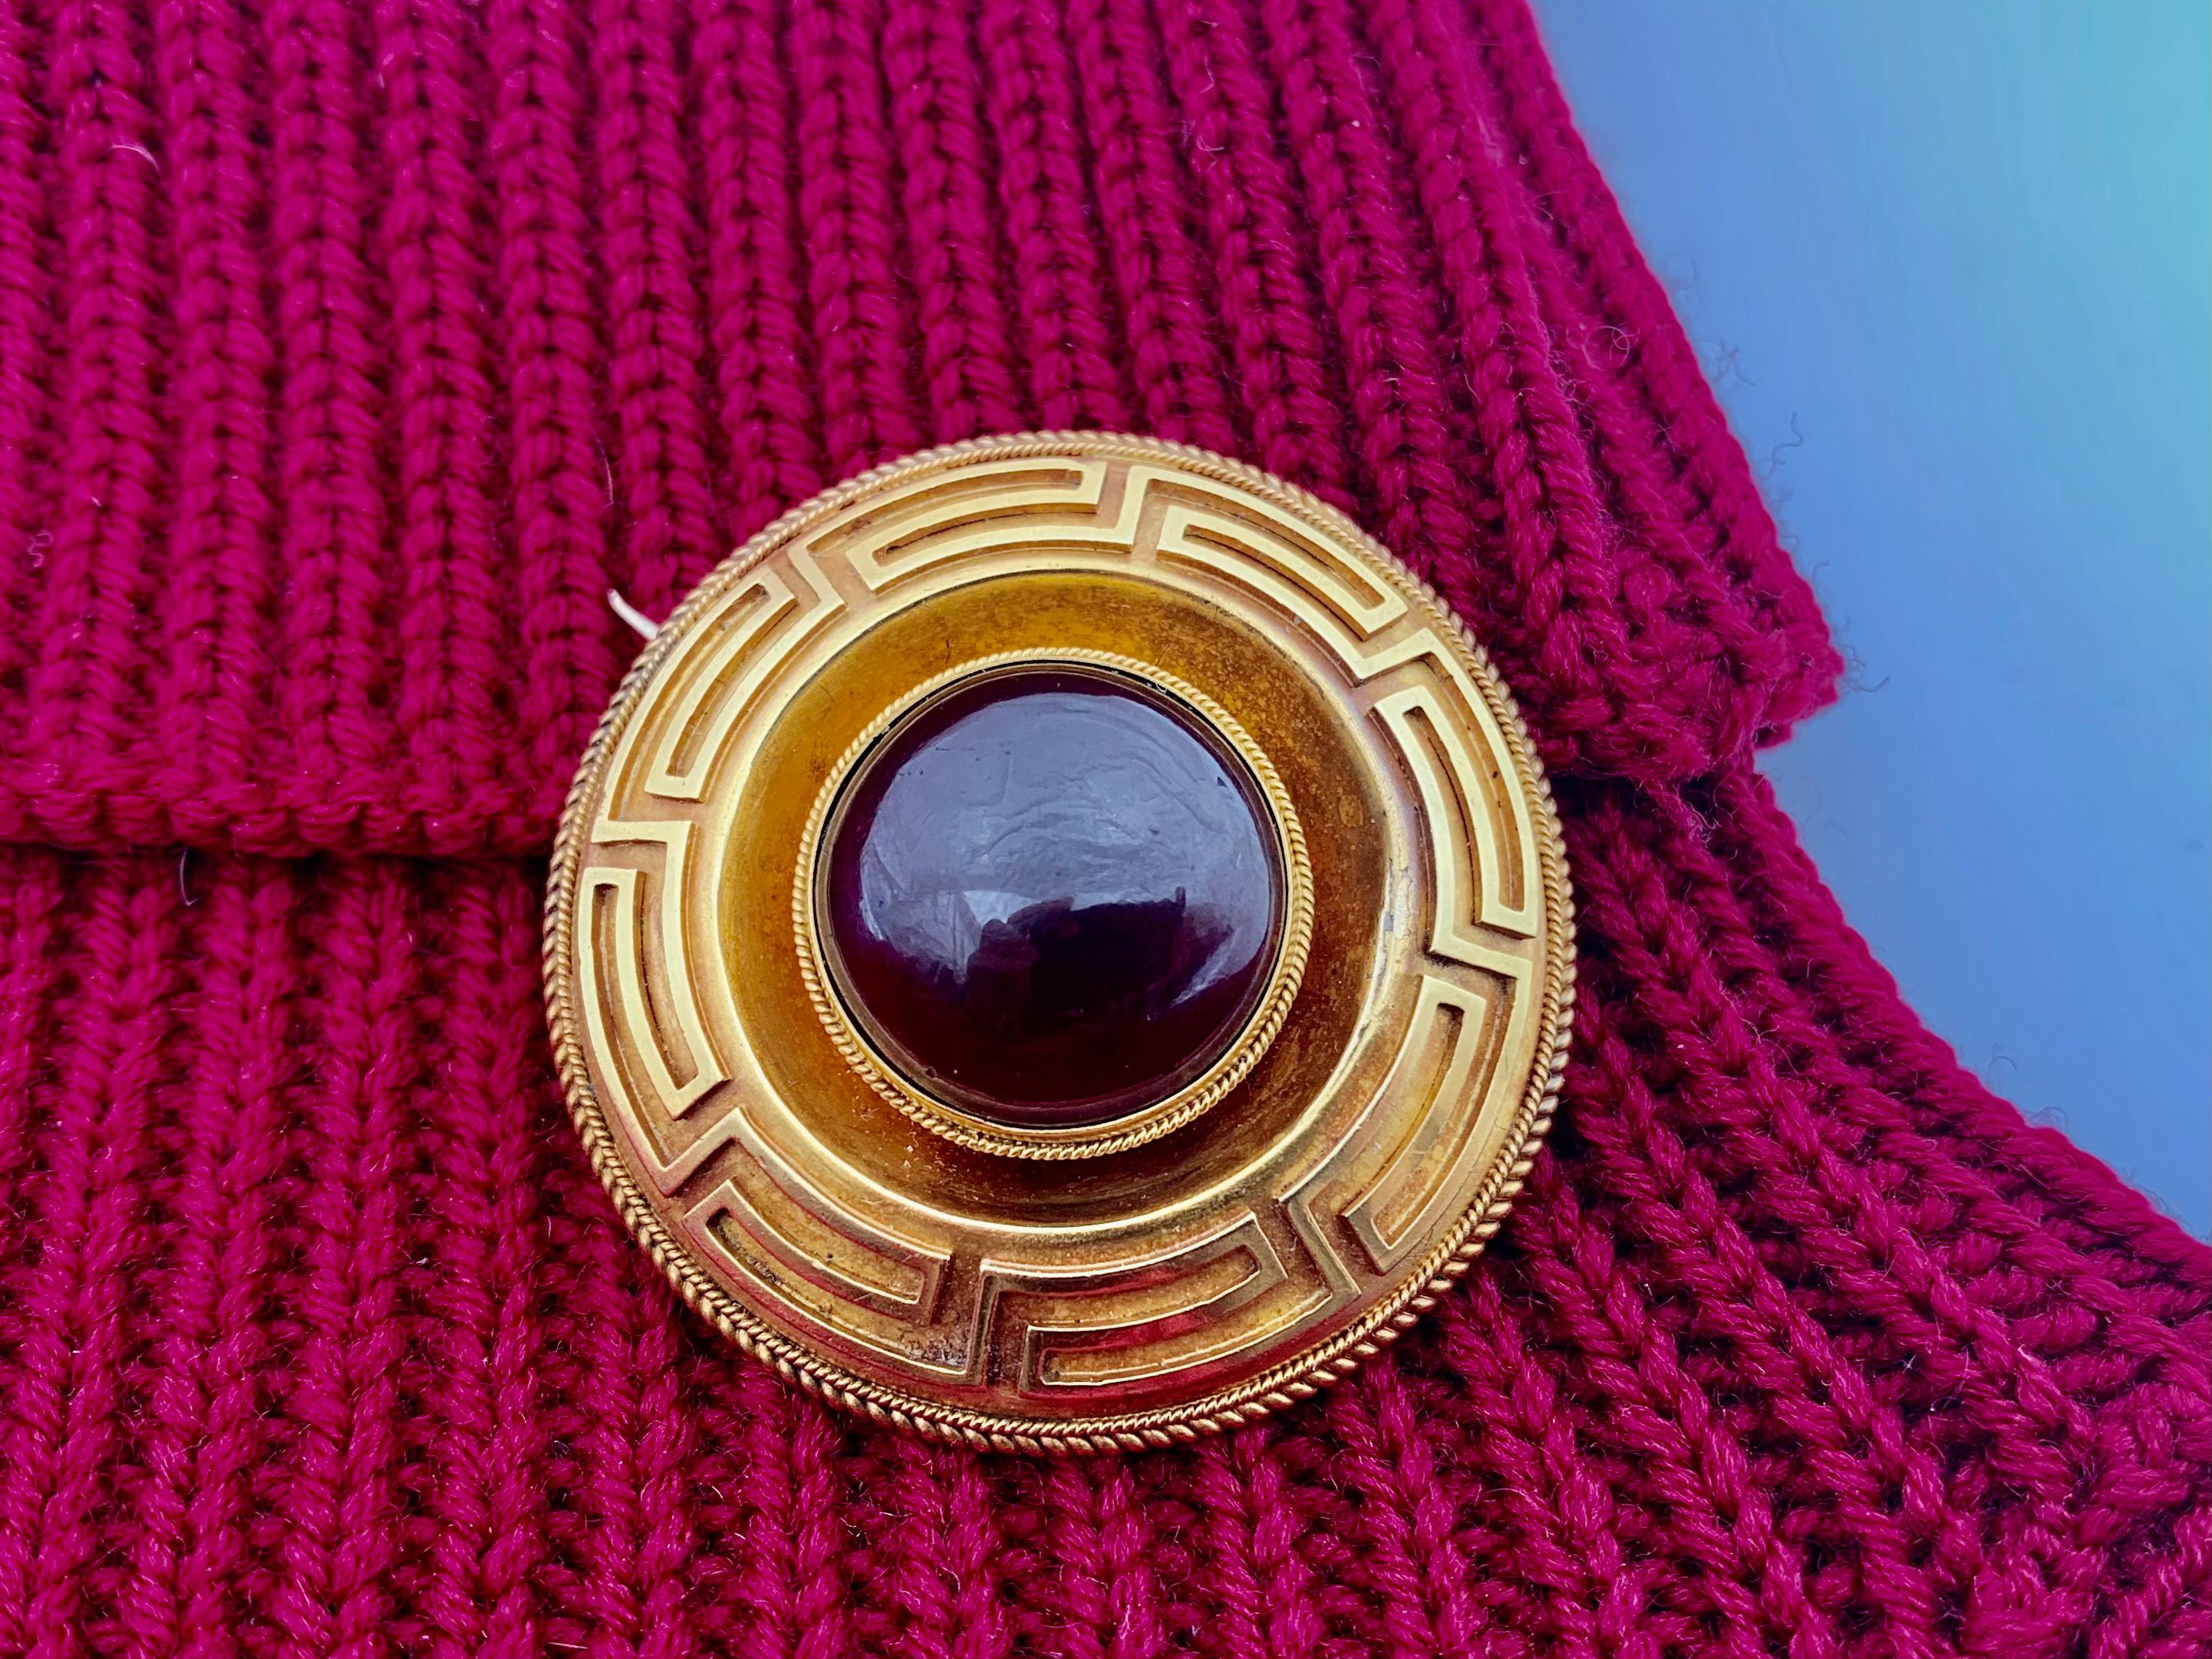 Superb quality antique Etruscan Revival gold and cabochon garnet Greek key motif disk brooch. Centered by a substantial 16mm round deep red cabochon garnet set in a rope twist frame within a dramatic concave textured gold circle surrounded by a bold